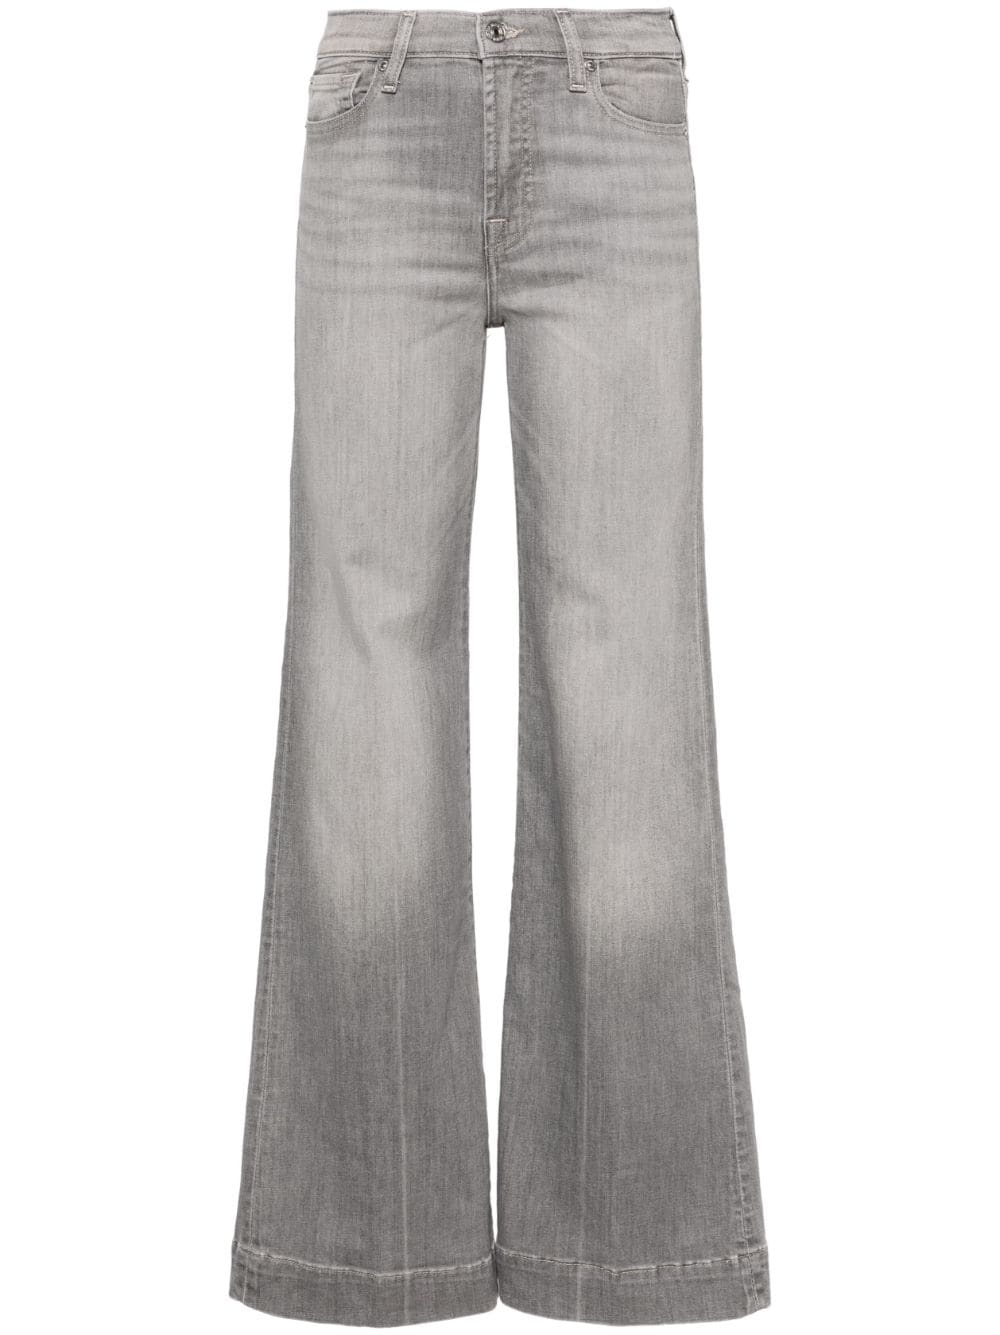 7 For All Mankind Modern Dojo high-rise flared jeans - Grigio